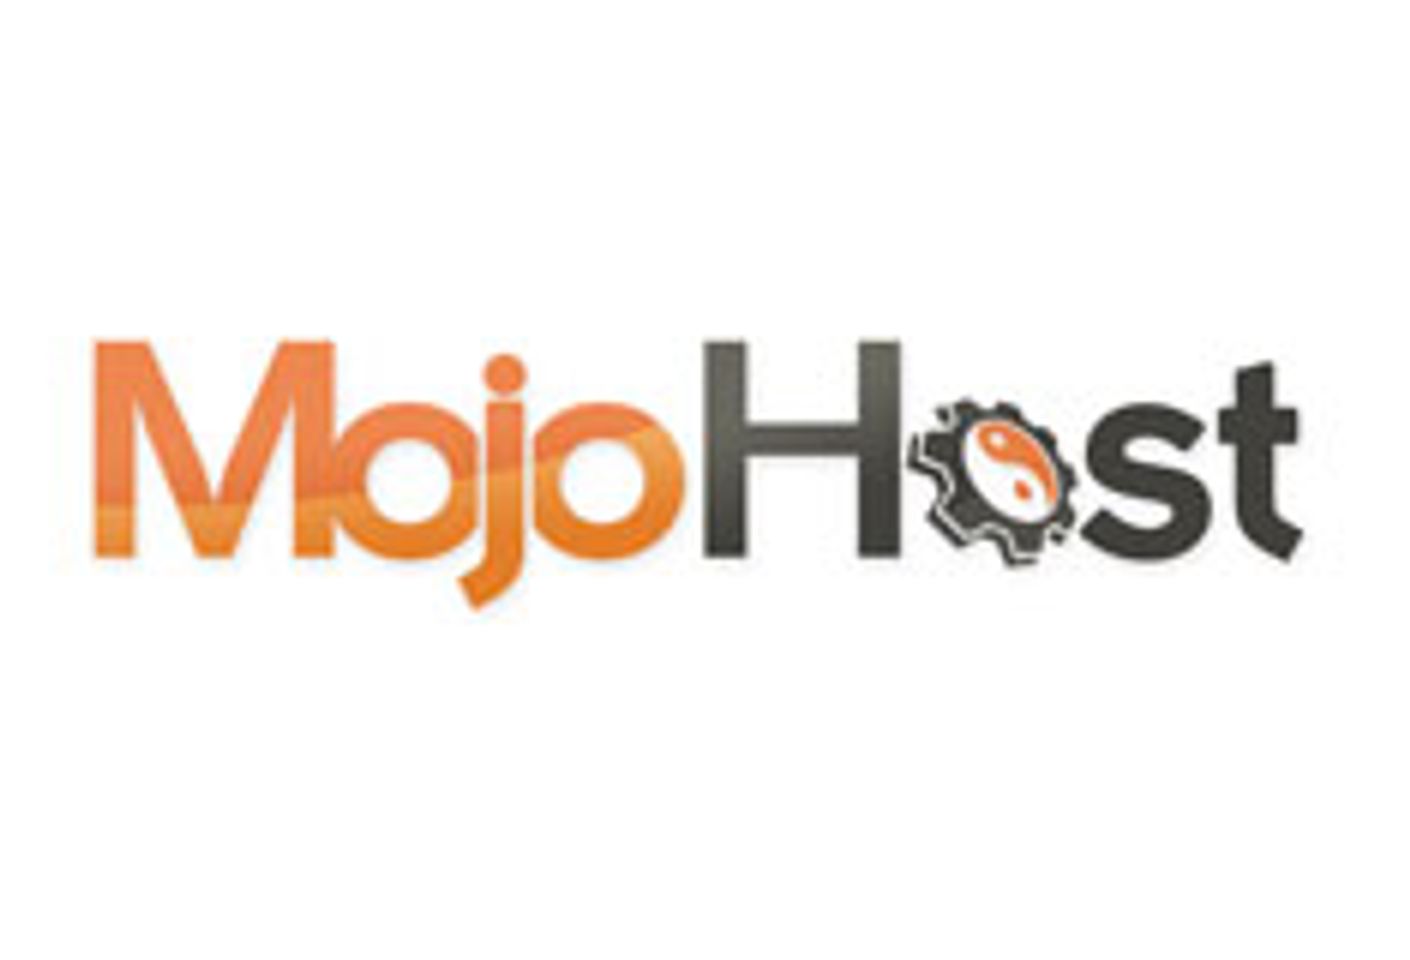 MojoHost Supports Phoenix Forum, Celebrates 10 Years in Business